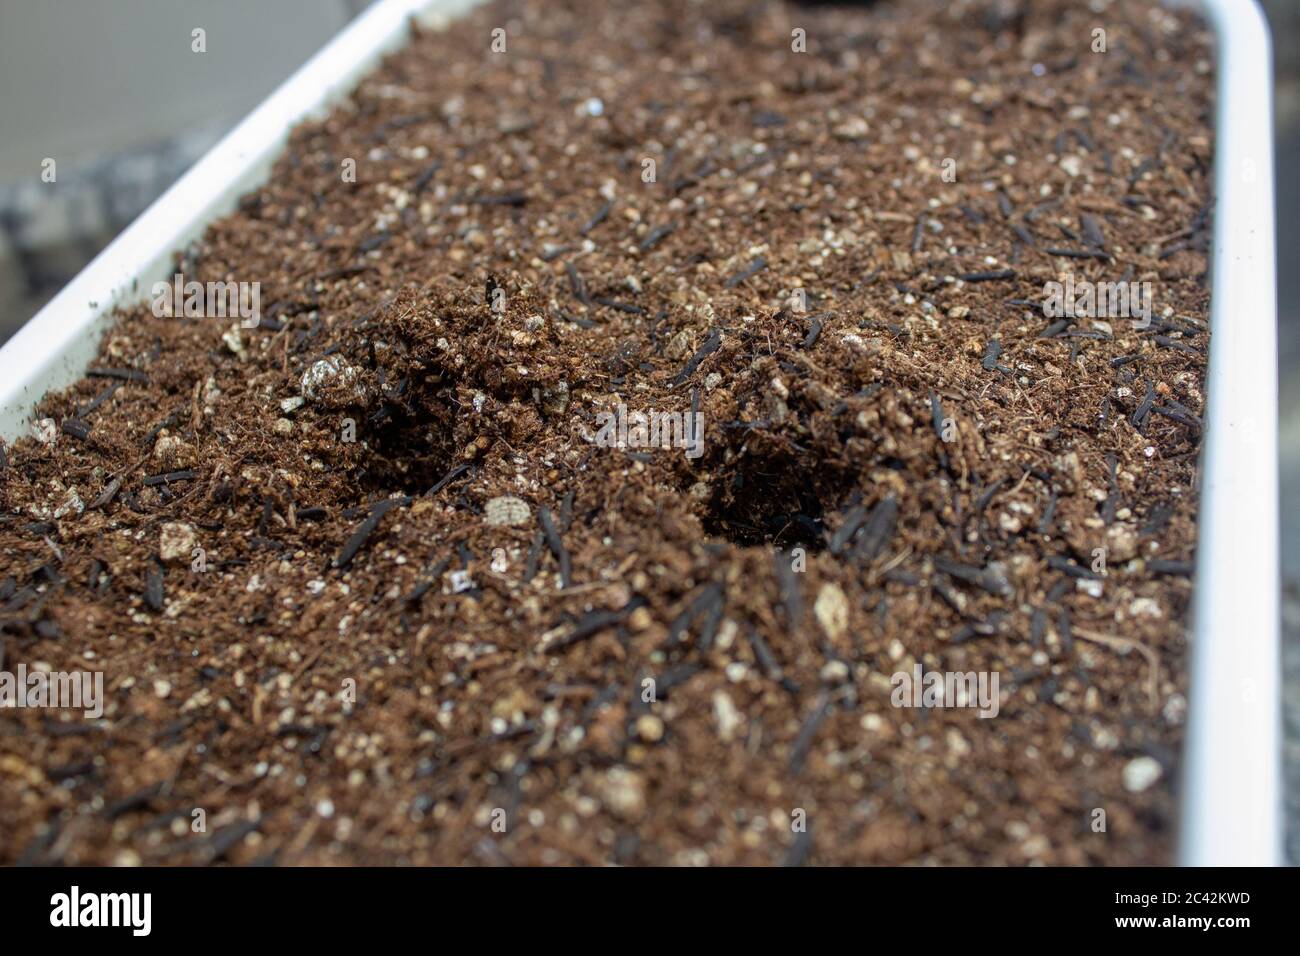 Holes on the soil of a home garden for planting some herbs Stock Photo